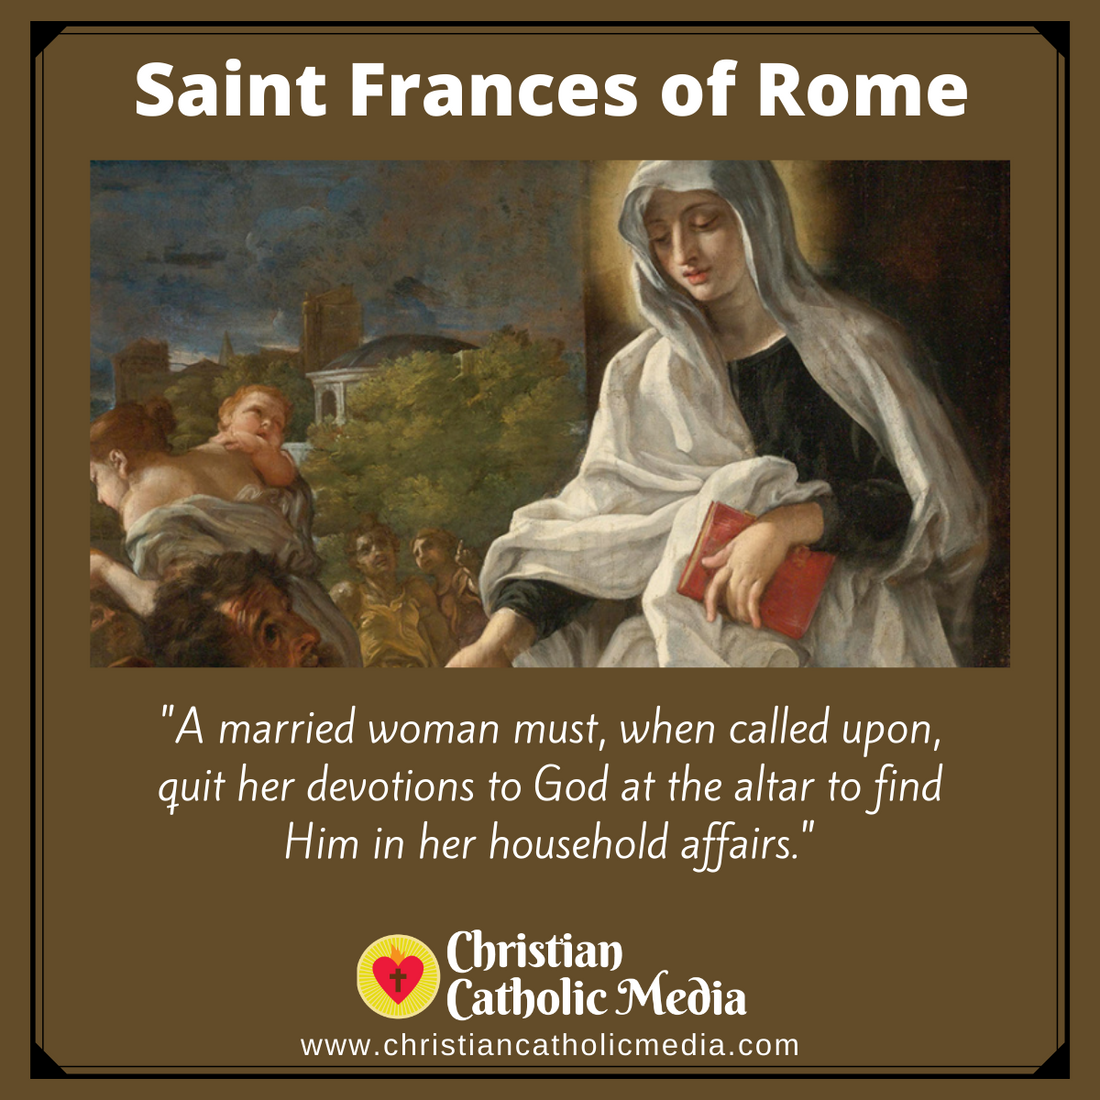 St. Frances of Rome - Wednesday March 9, 2022